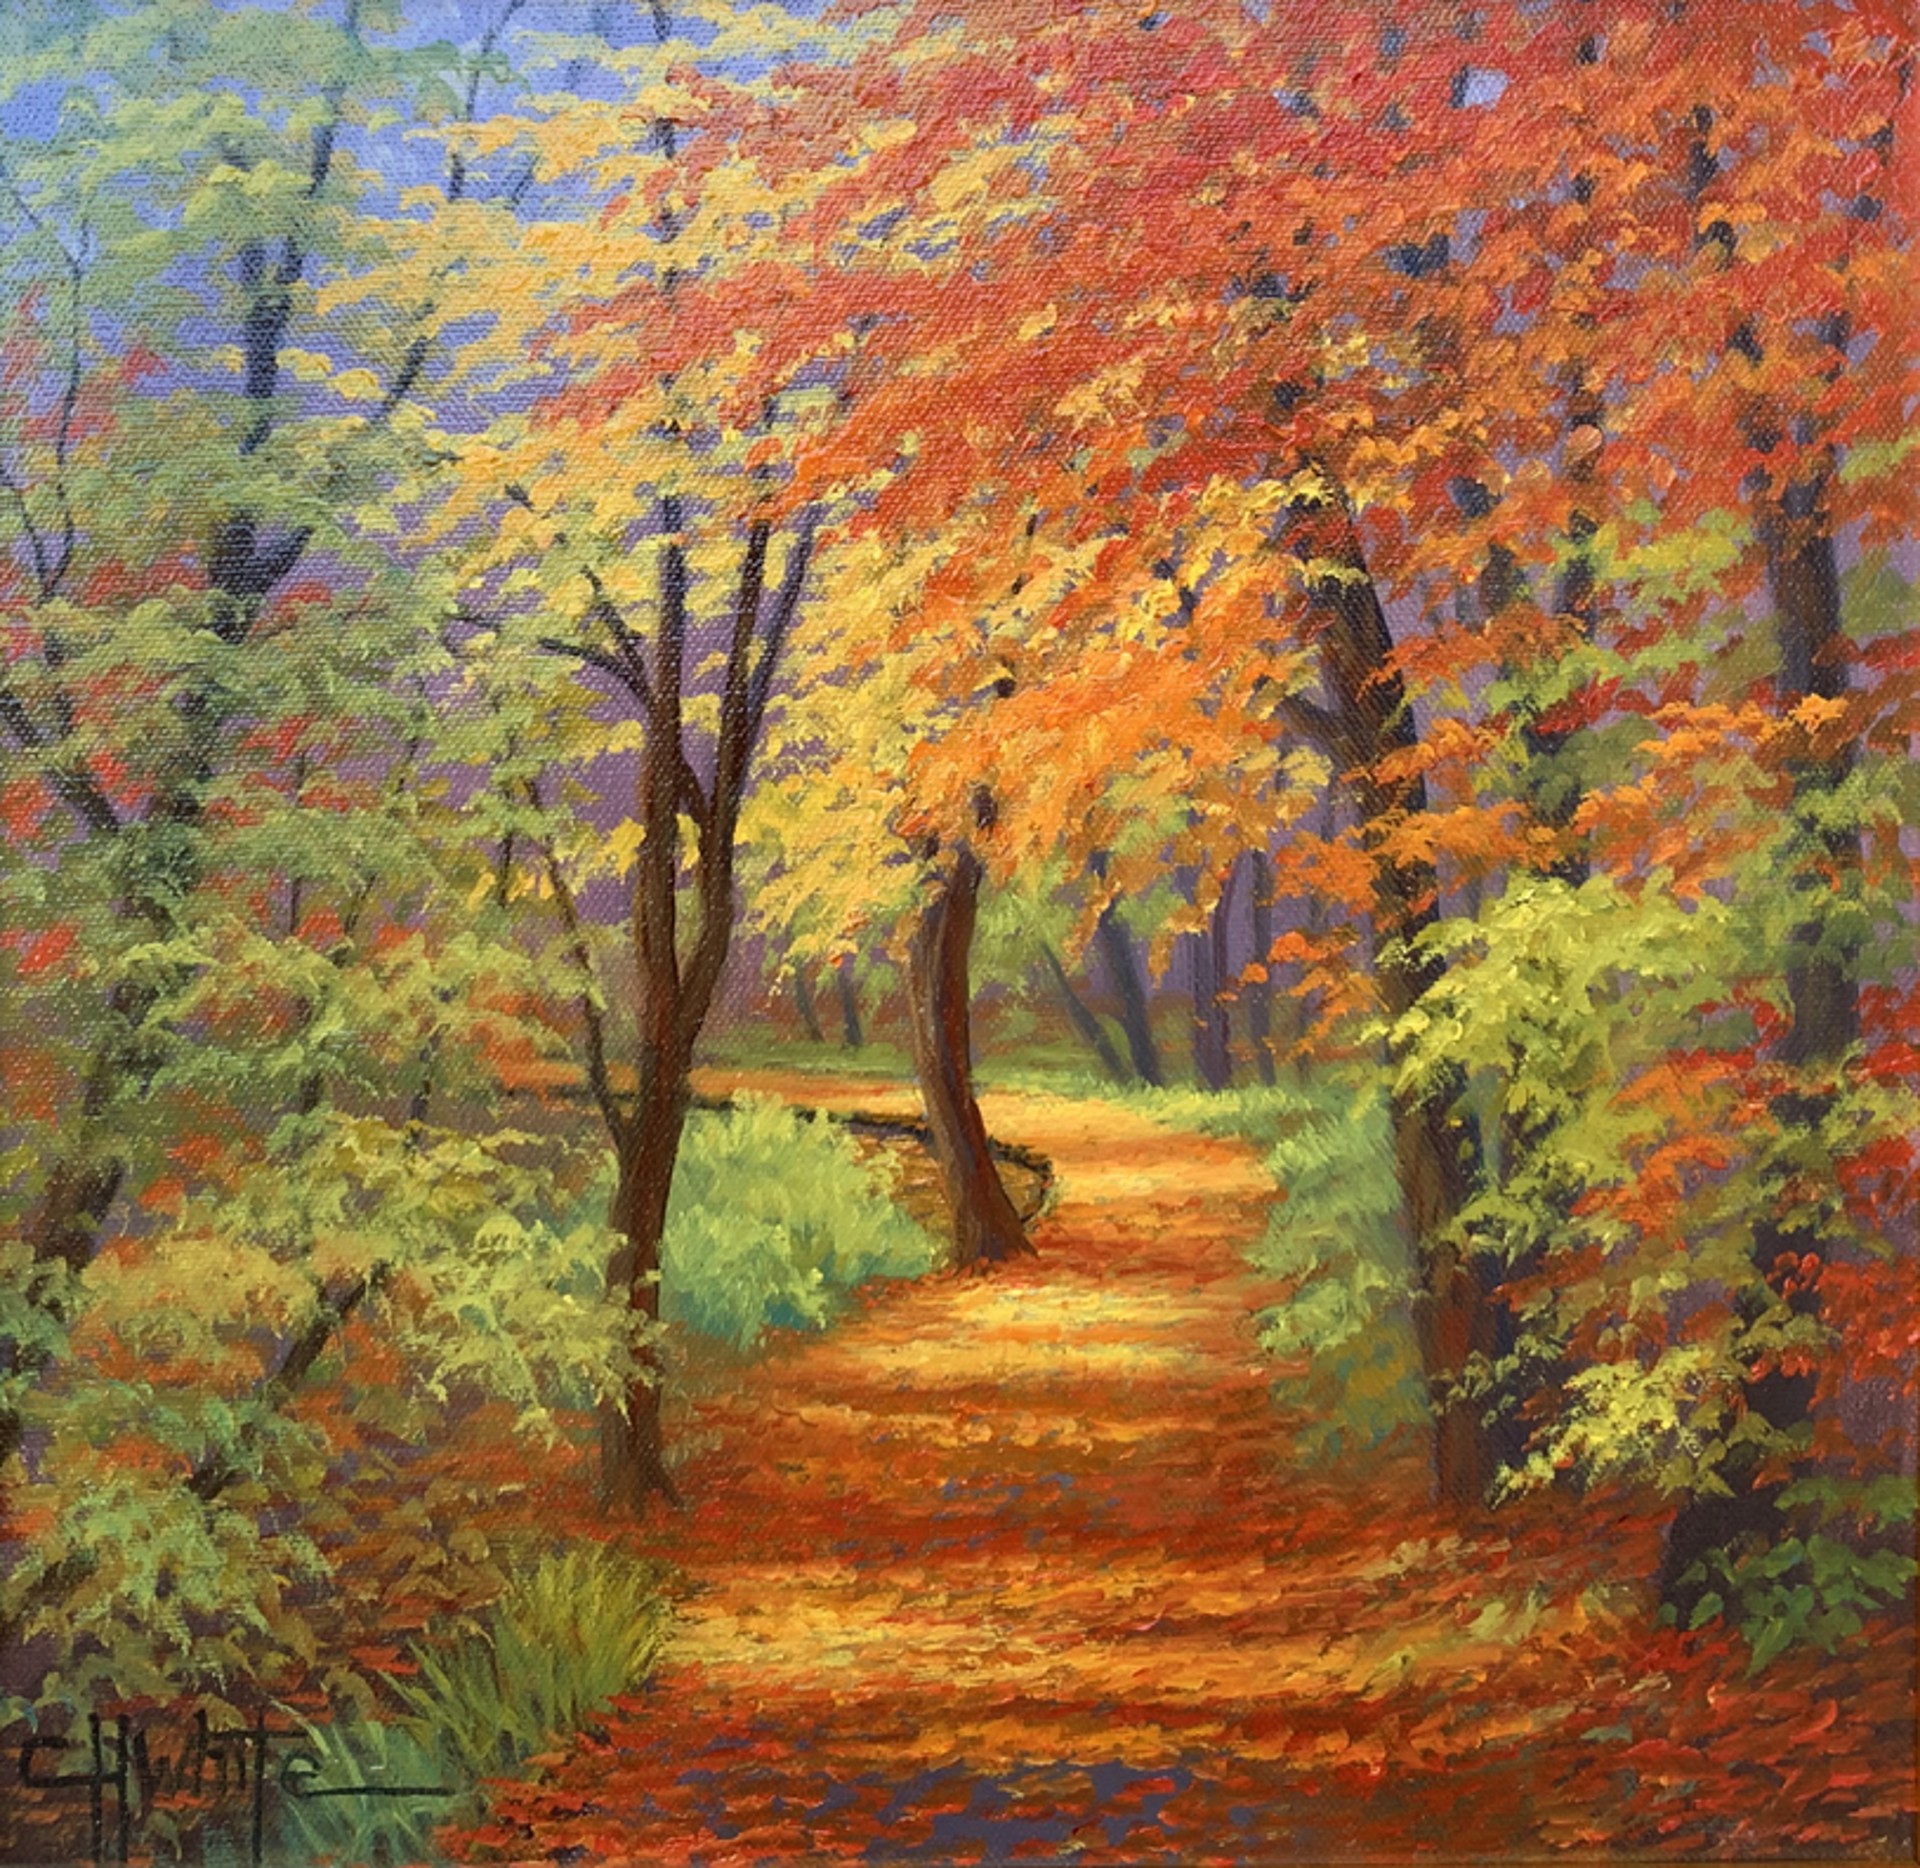 Autumn Pathway by Charles White